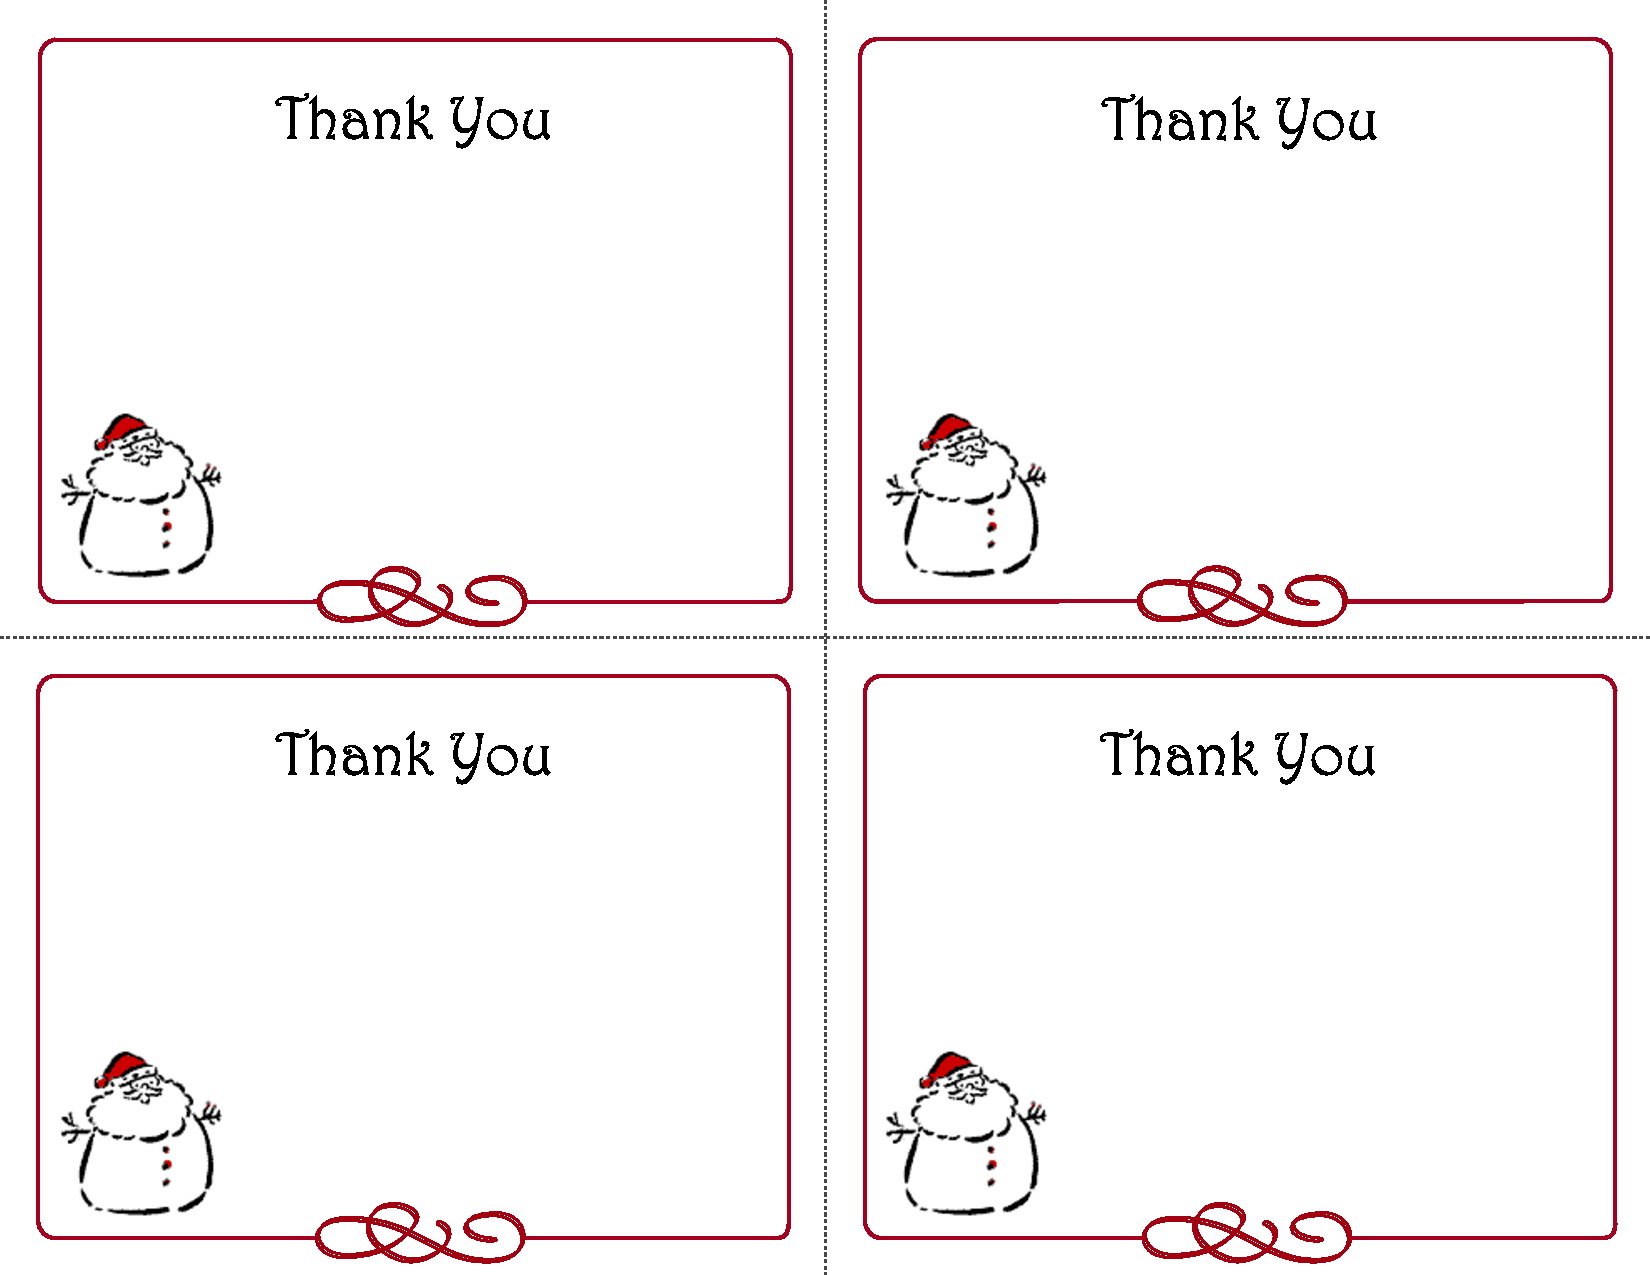 Free Thank You Cards Printable | Free Printable Holiday Gift Intended For Christmas Thank You Card Templates Free